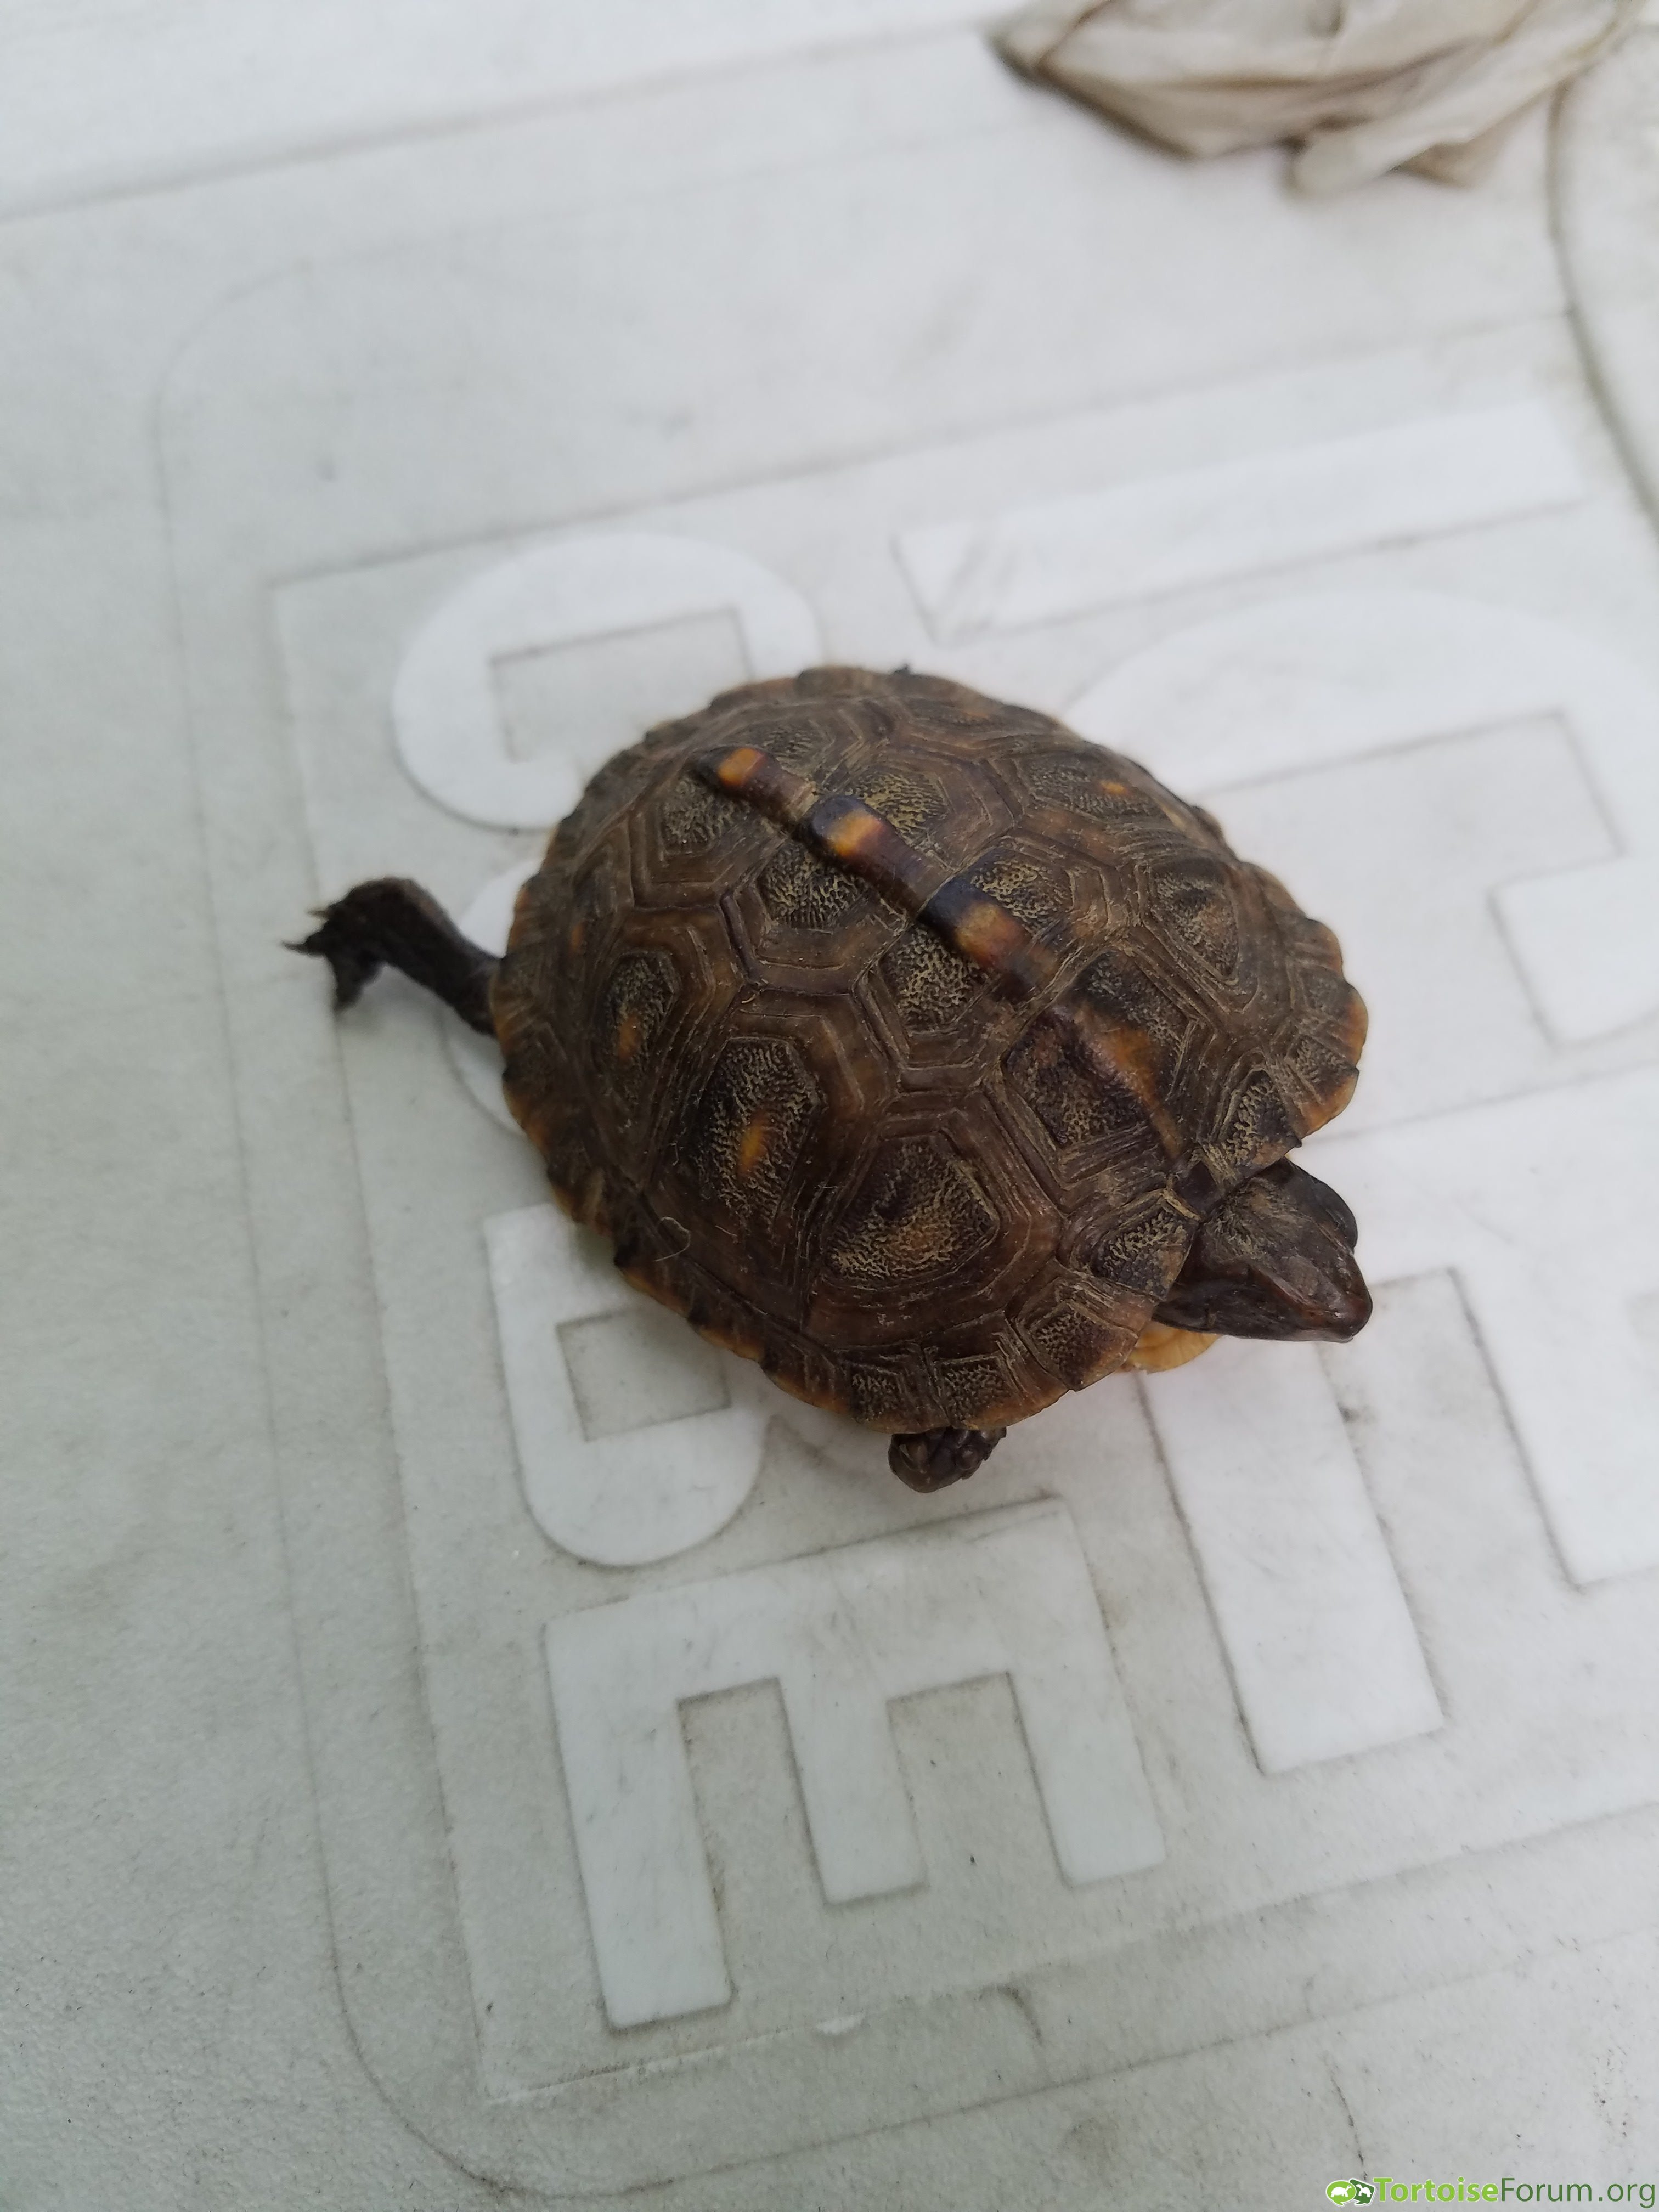 Just Found a Baby Turtle 5*18*2017